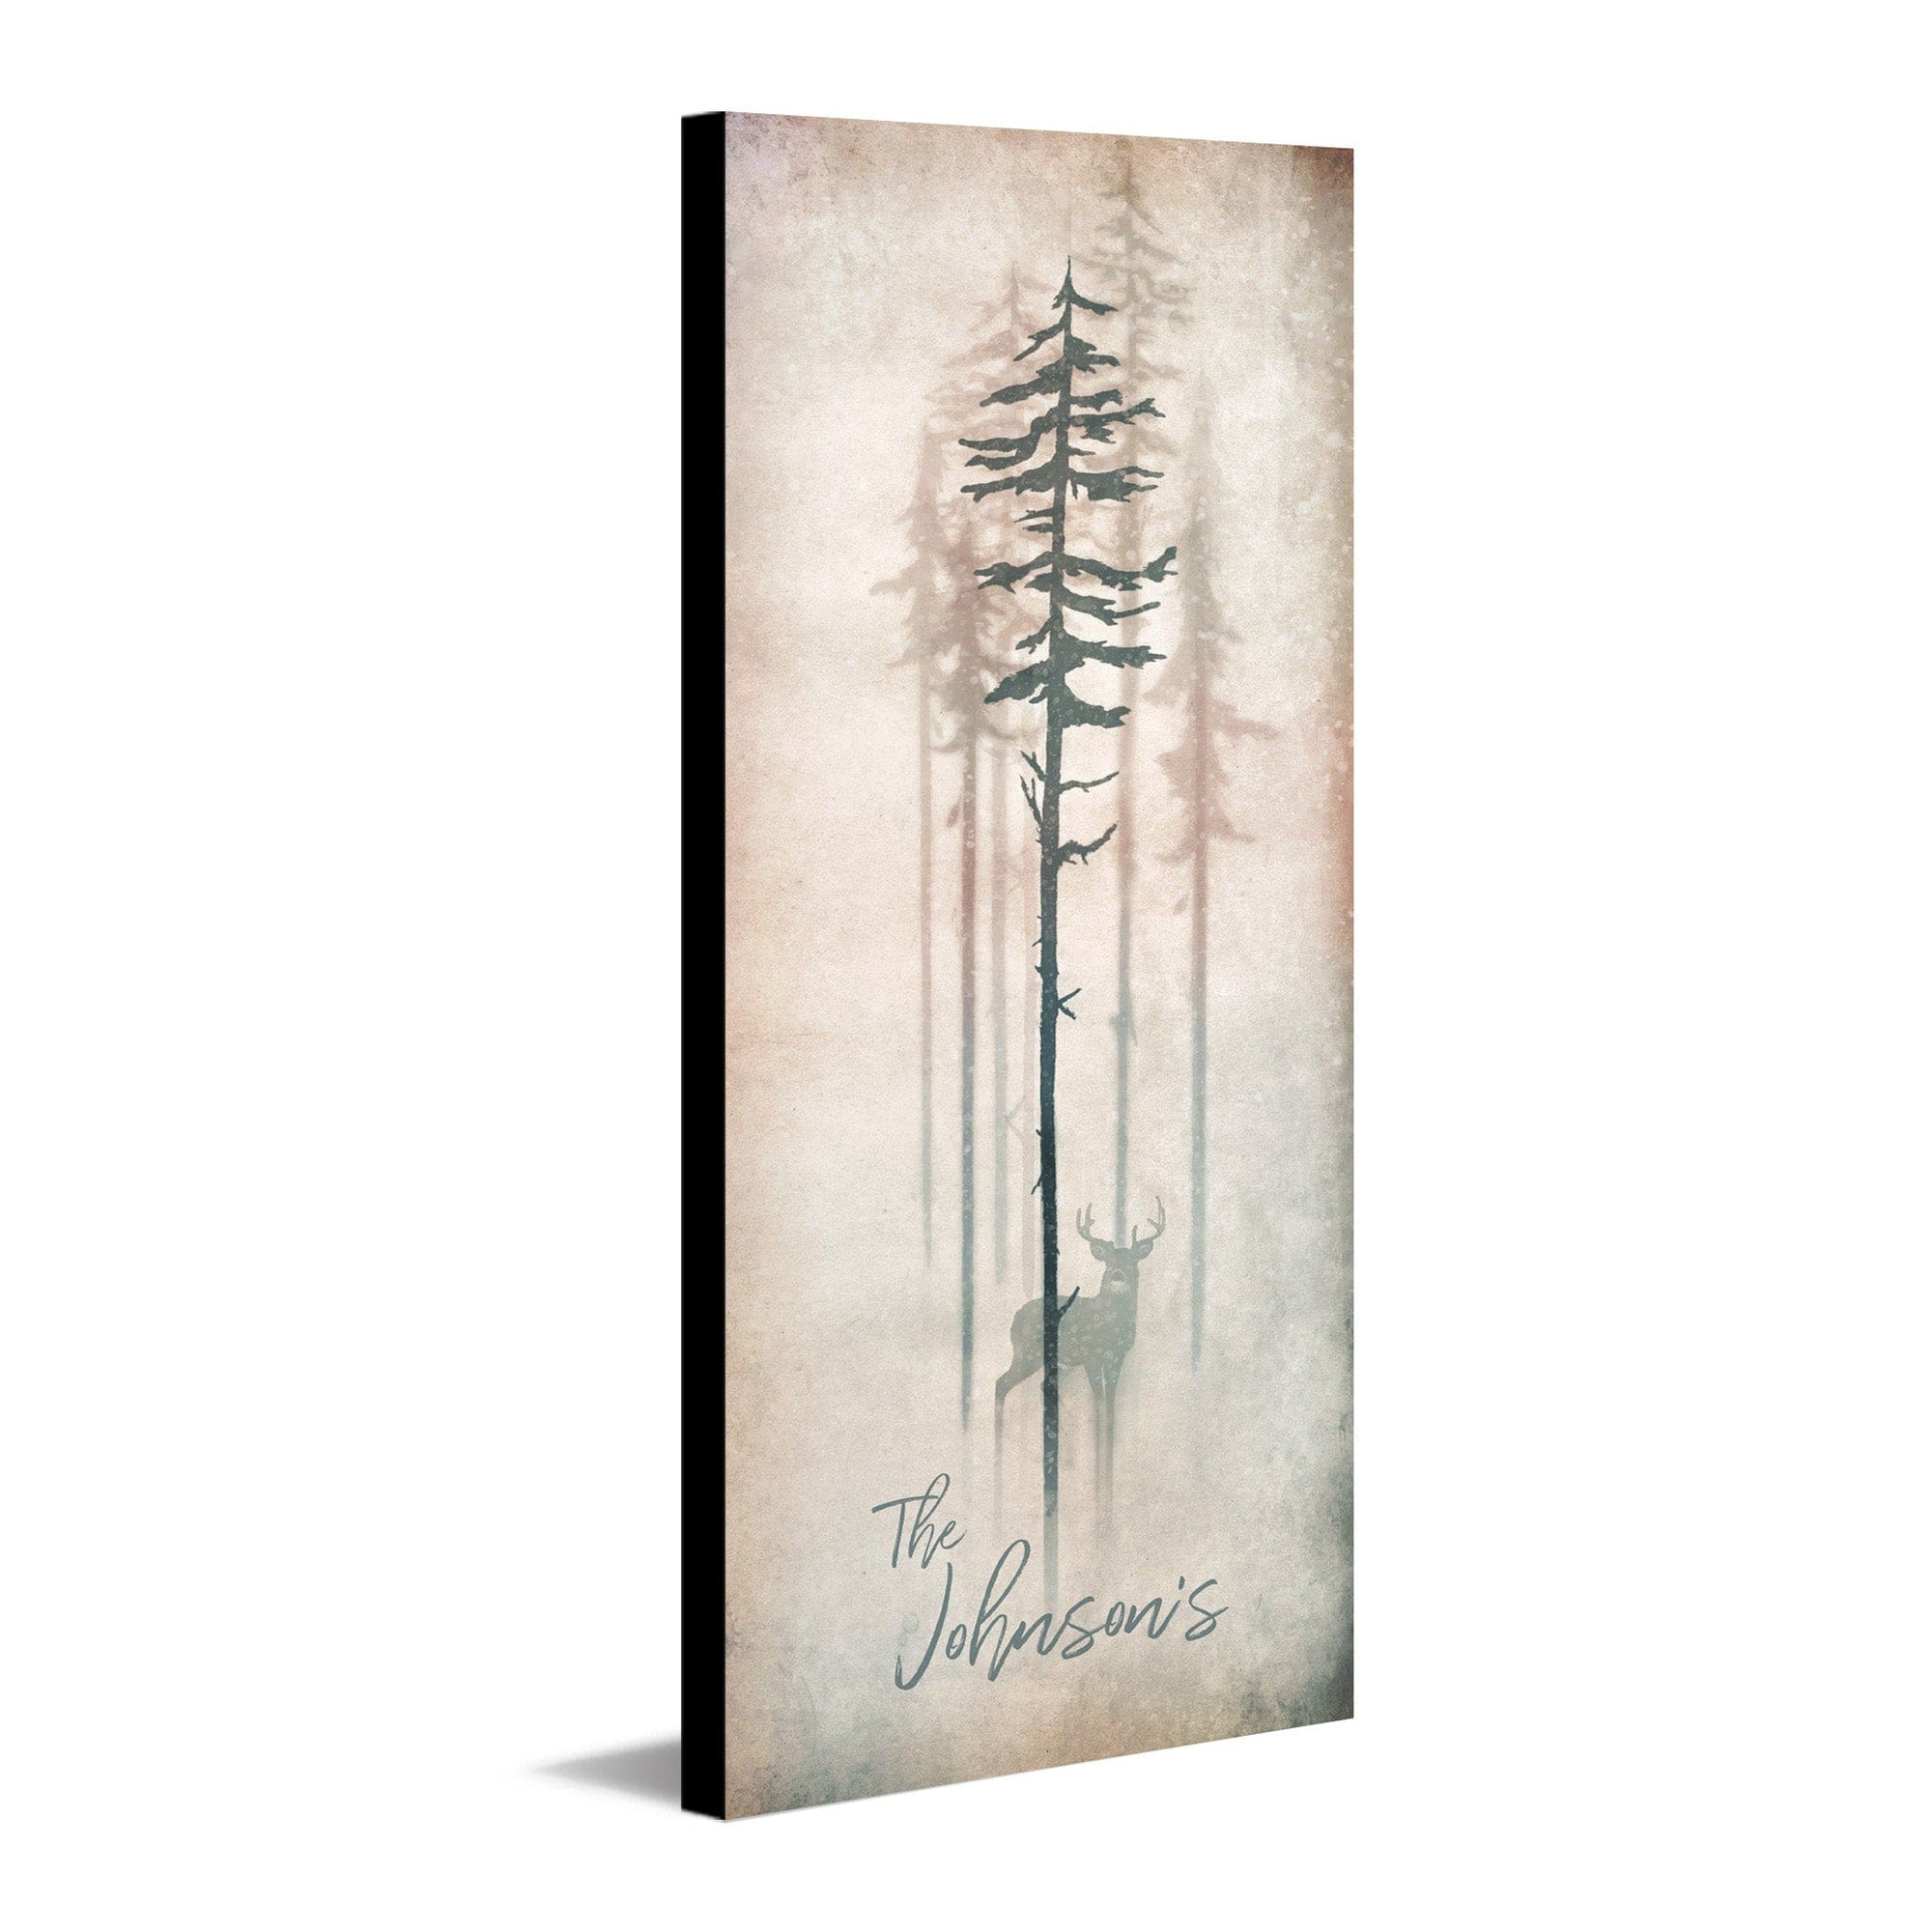 Contemporary Nature Wall Decor from Personal-Prints